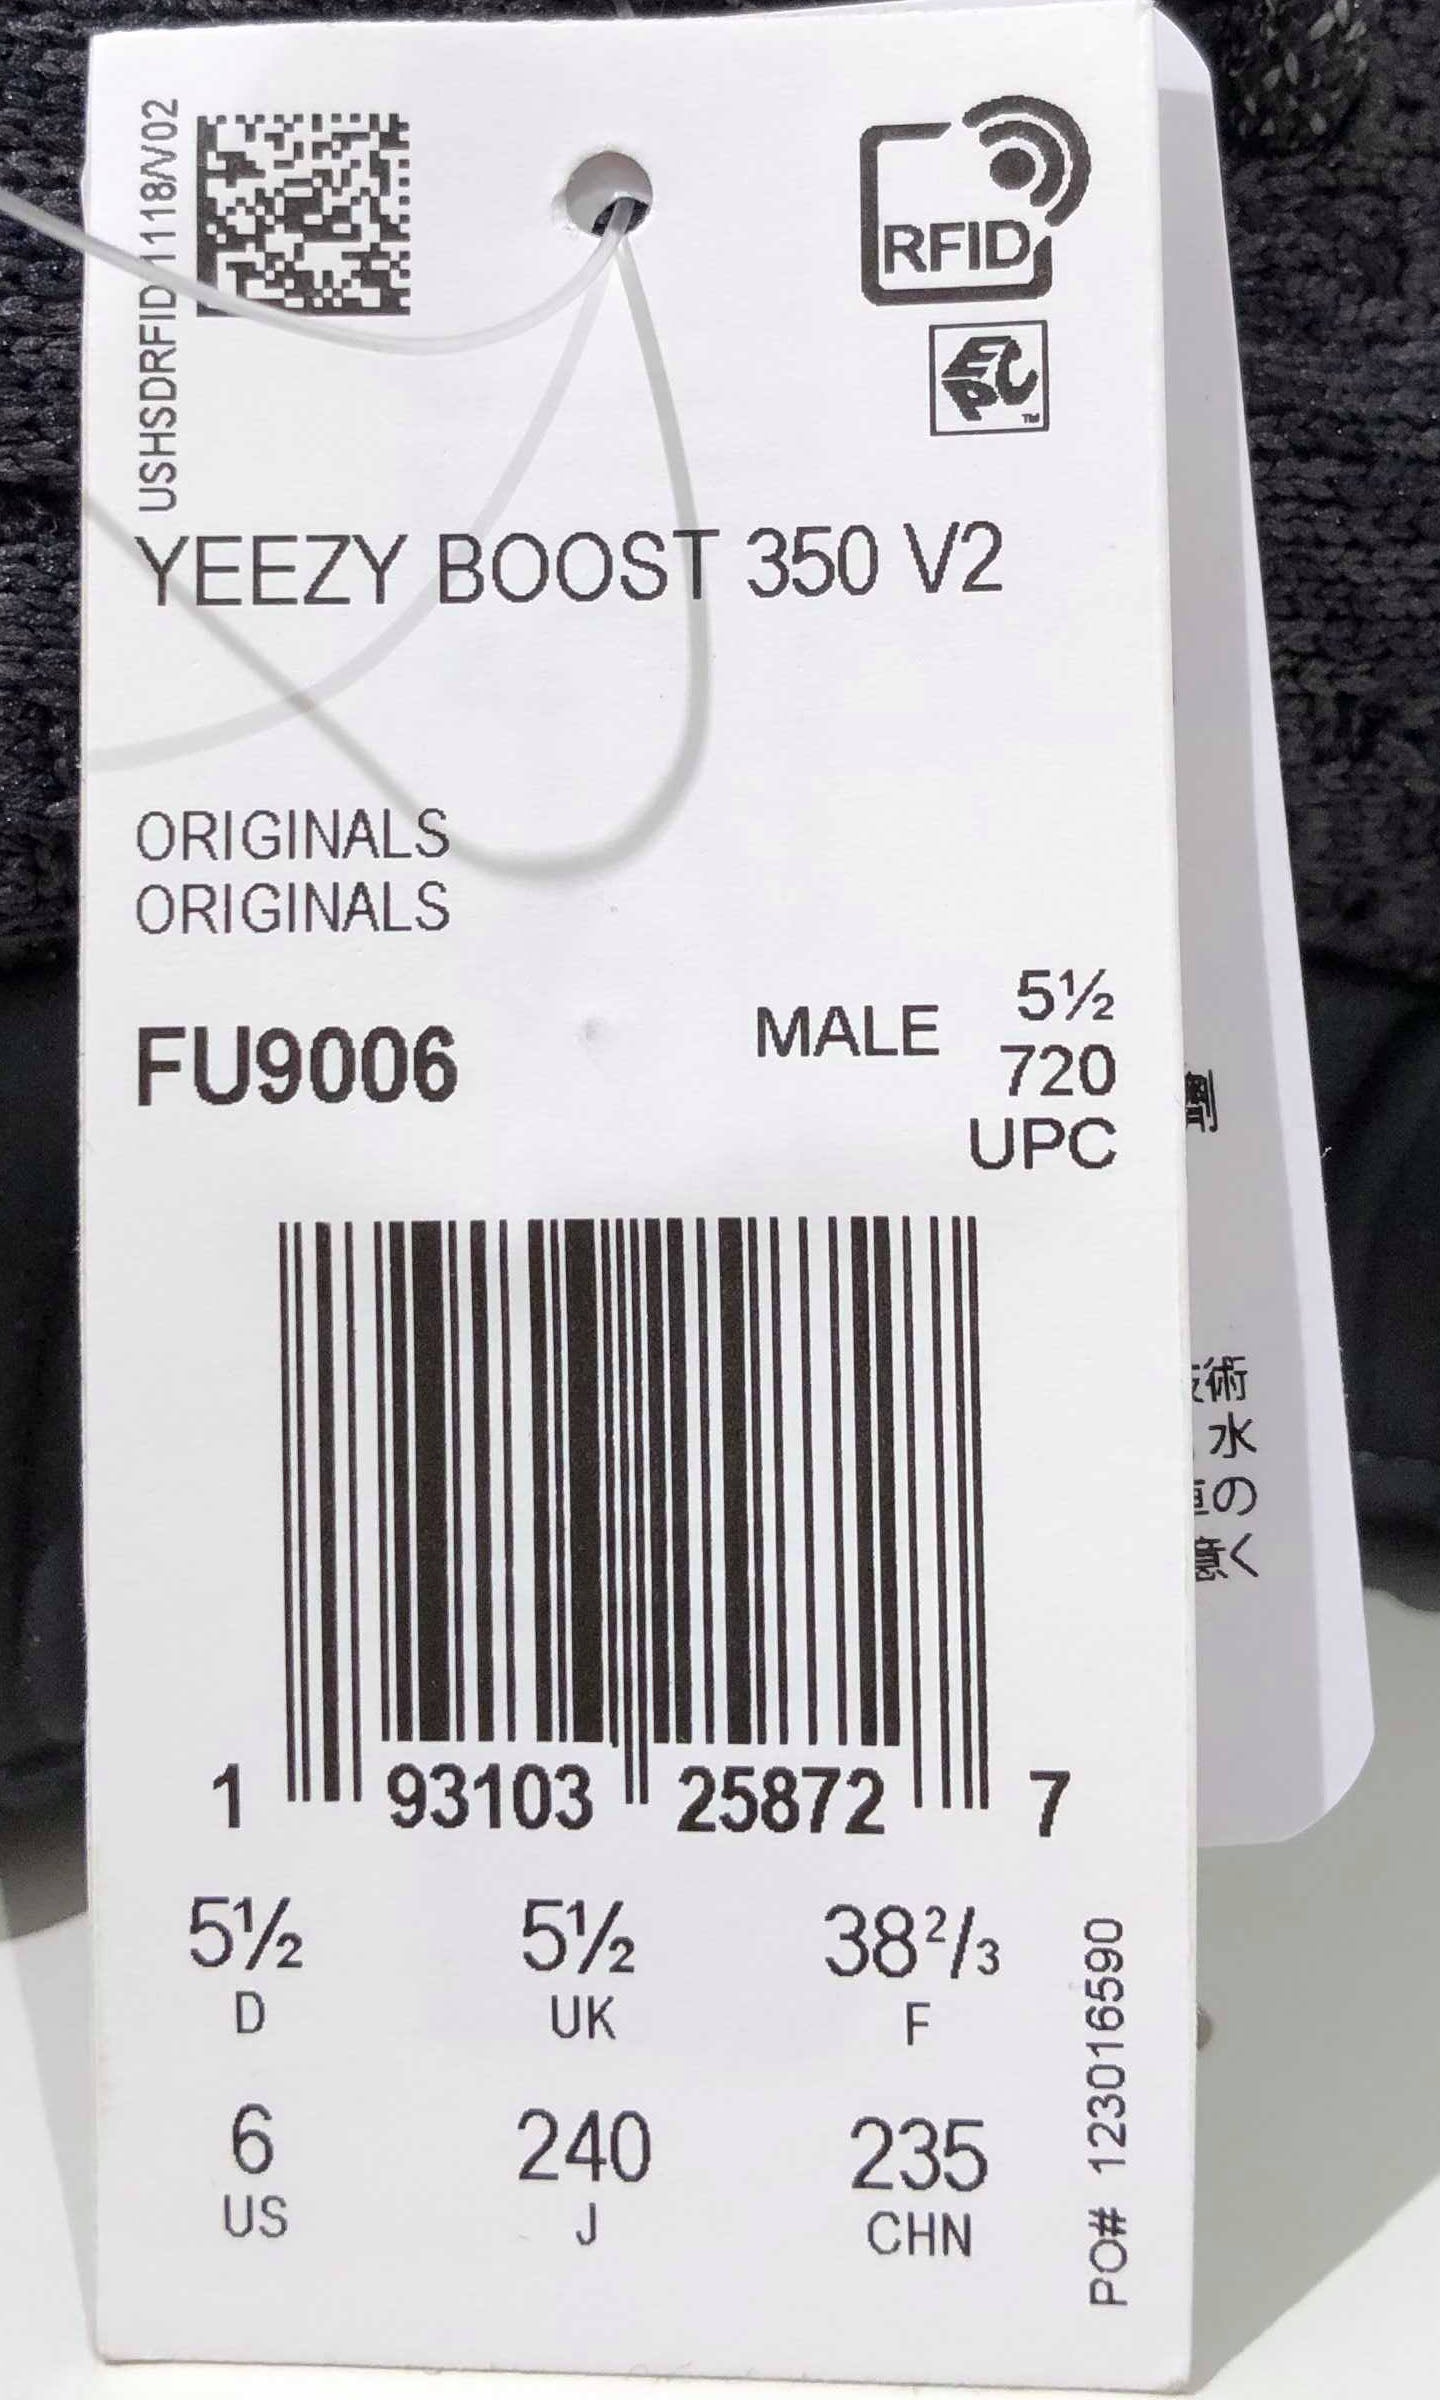 Will The Upcoming Yeezy 350 Boost V2 RESELL Worth